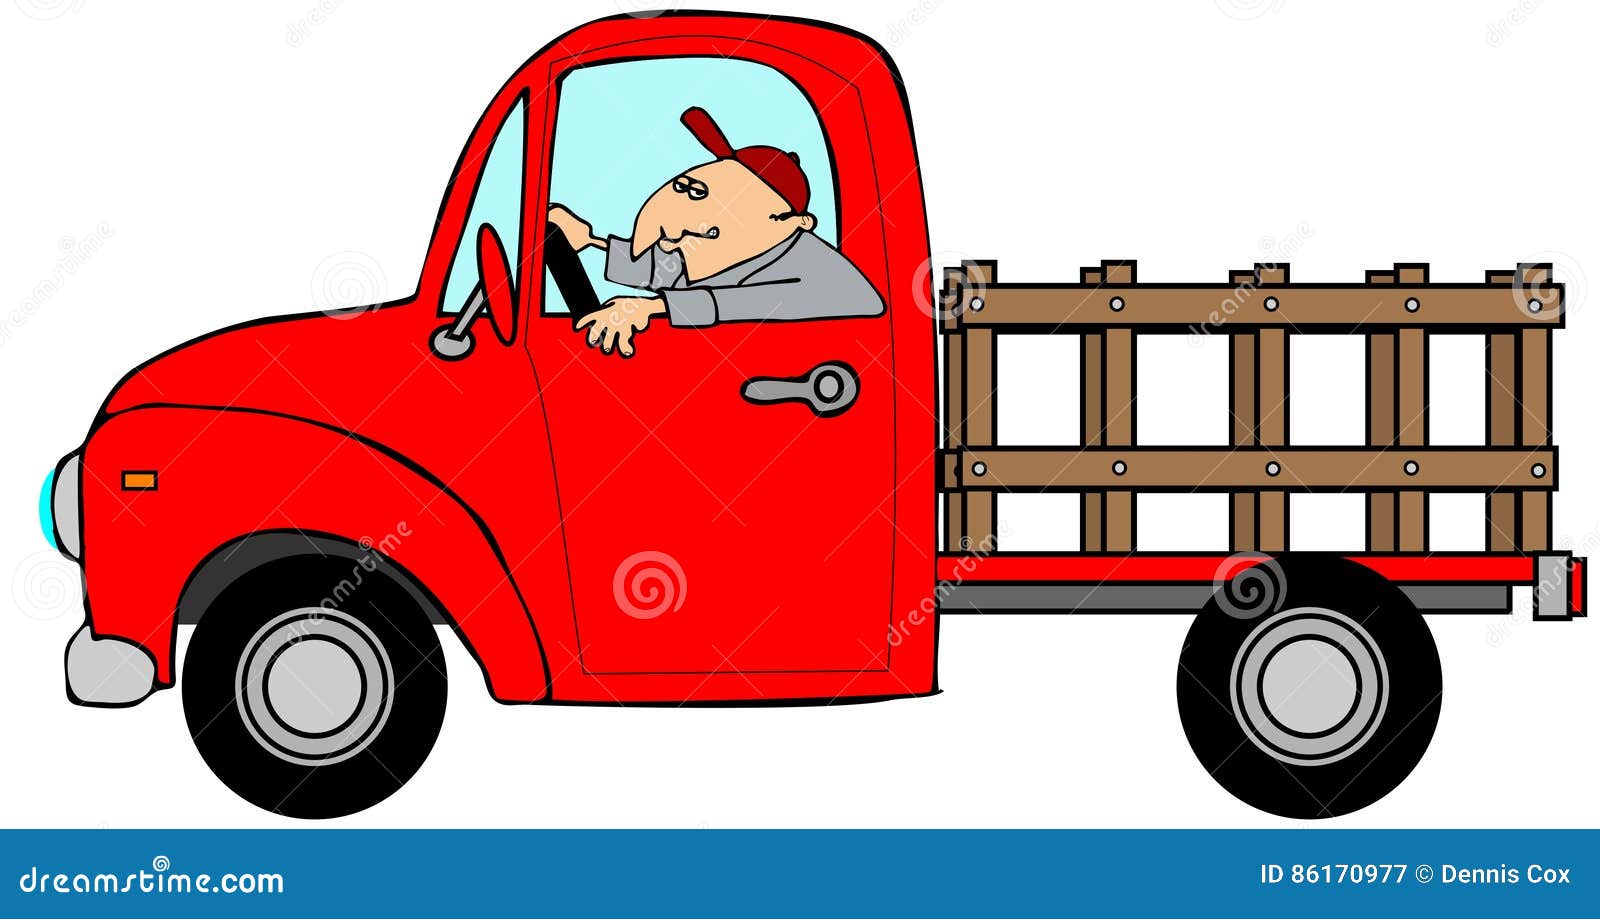 man driving a red stake-side truck